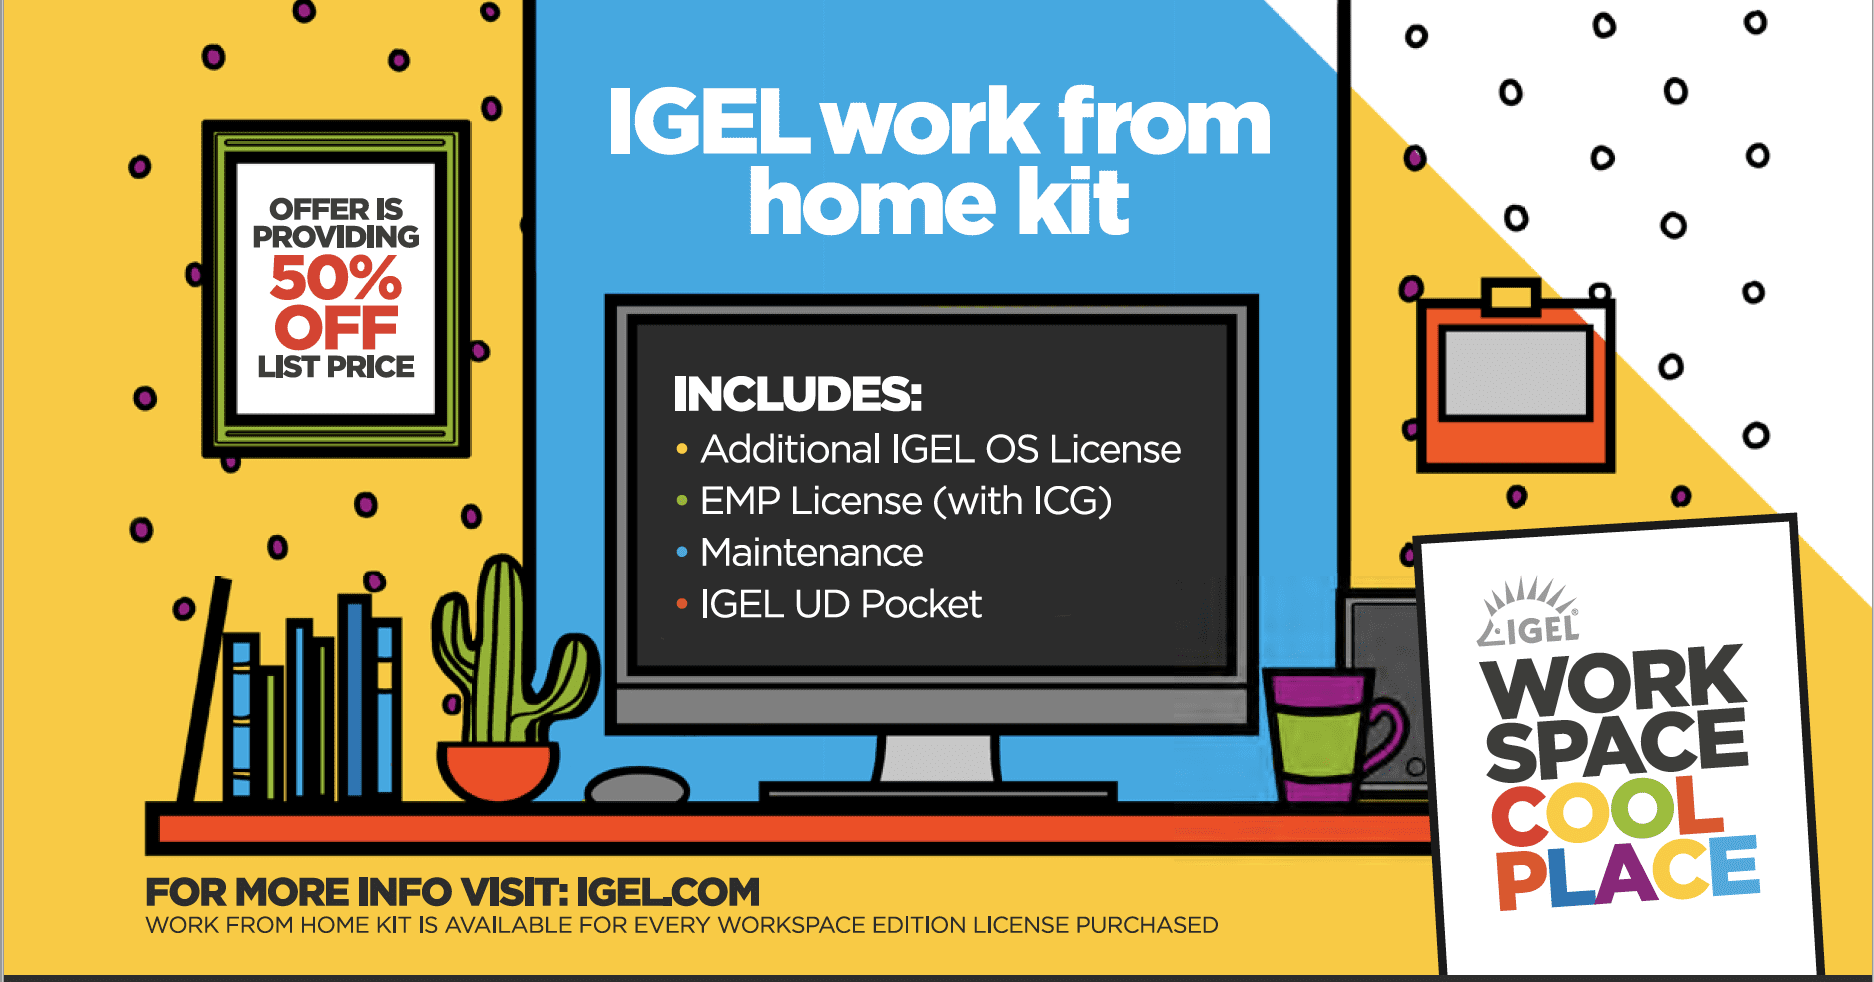 The IGEL Work From Home Kit